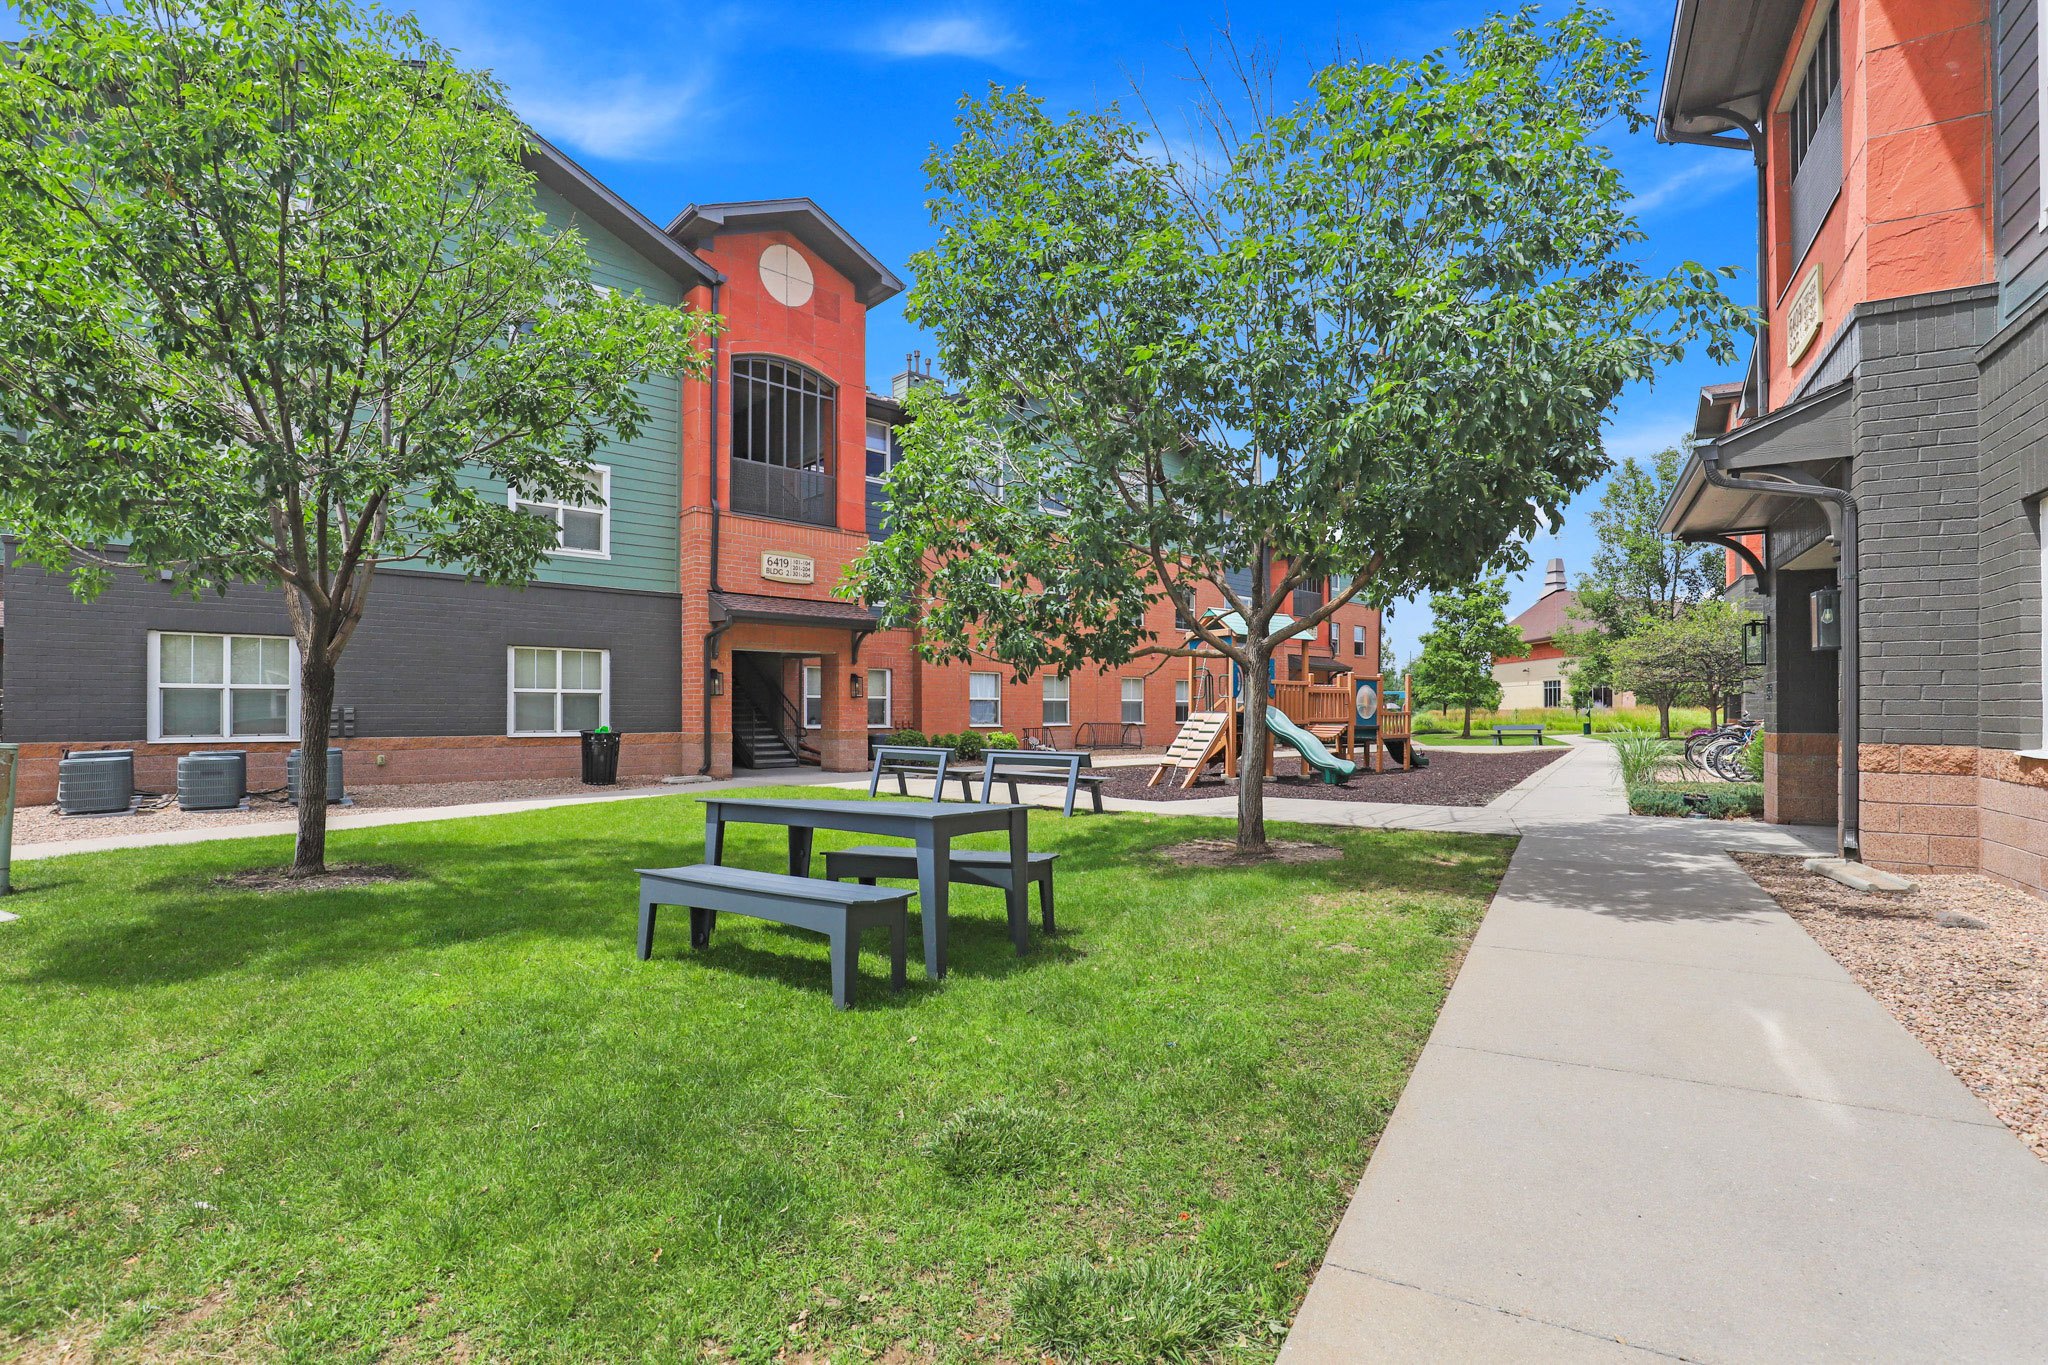 our apartments have a spacious courtyard with picnic tables at Apartments at Denver Place, Denver Colorado